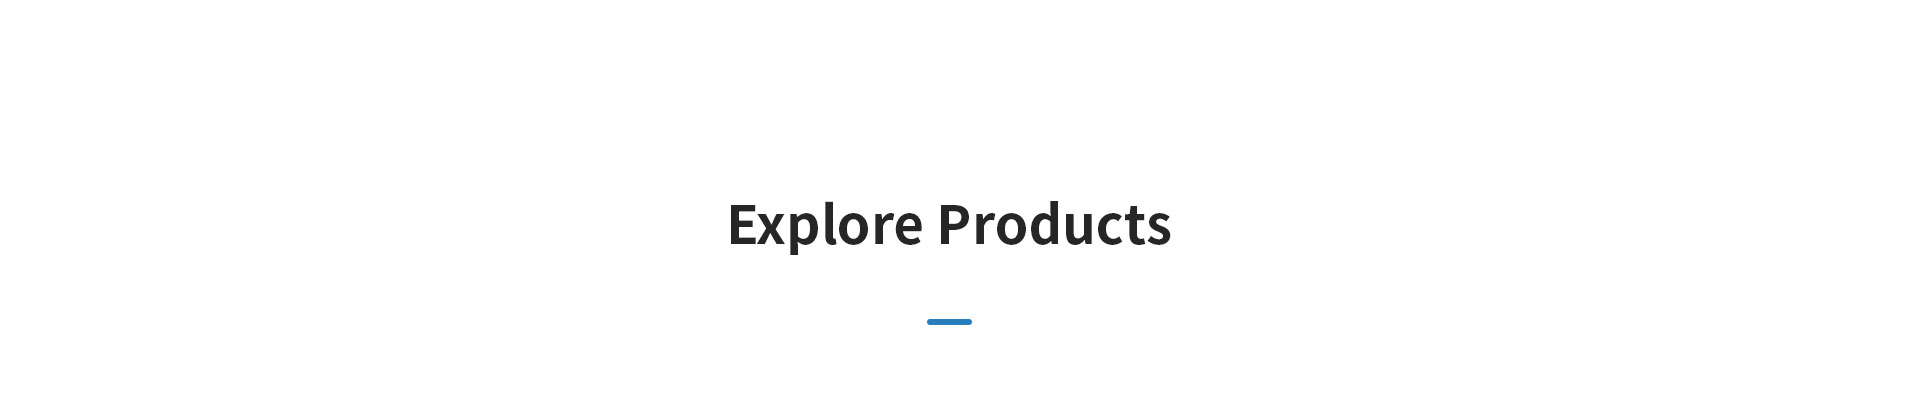 Explore Products